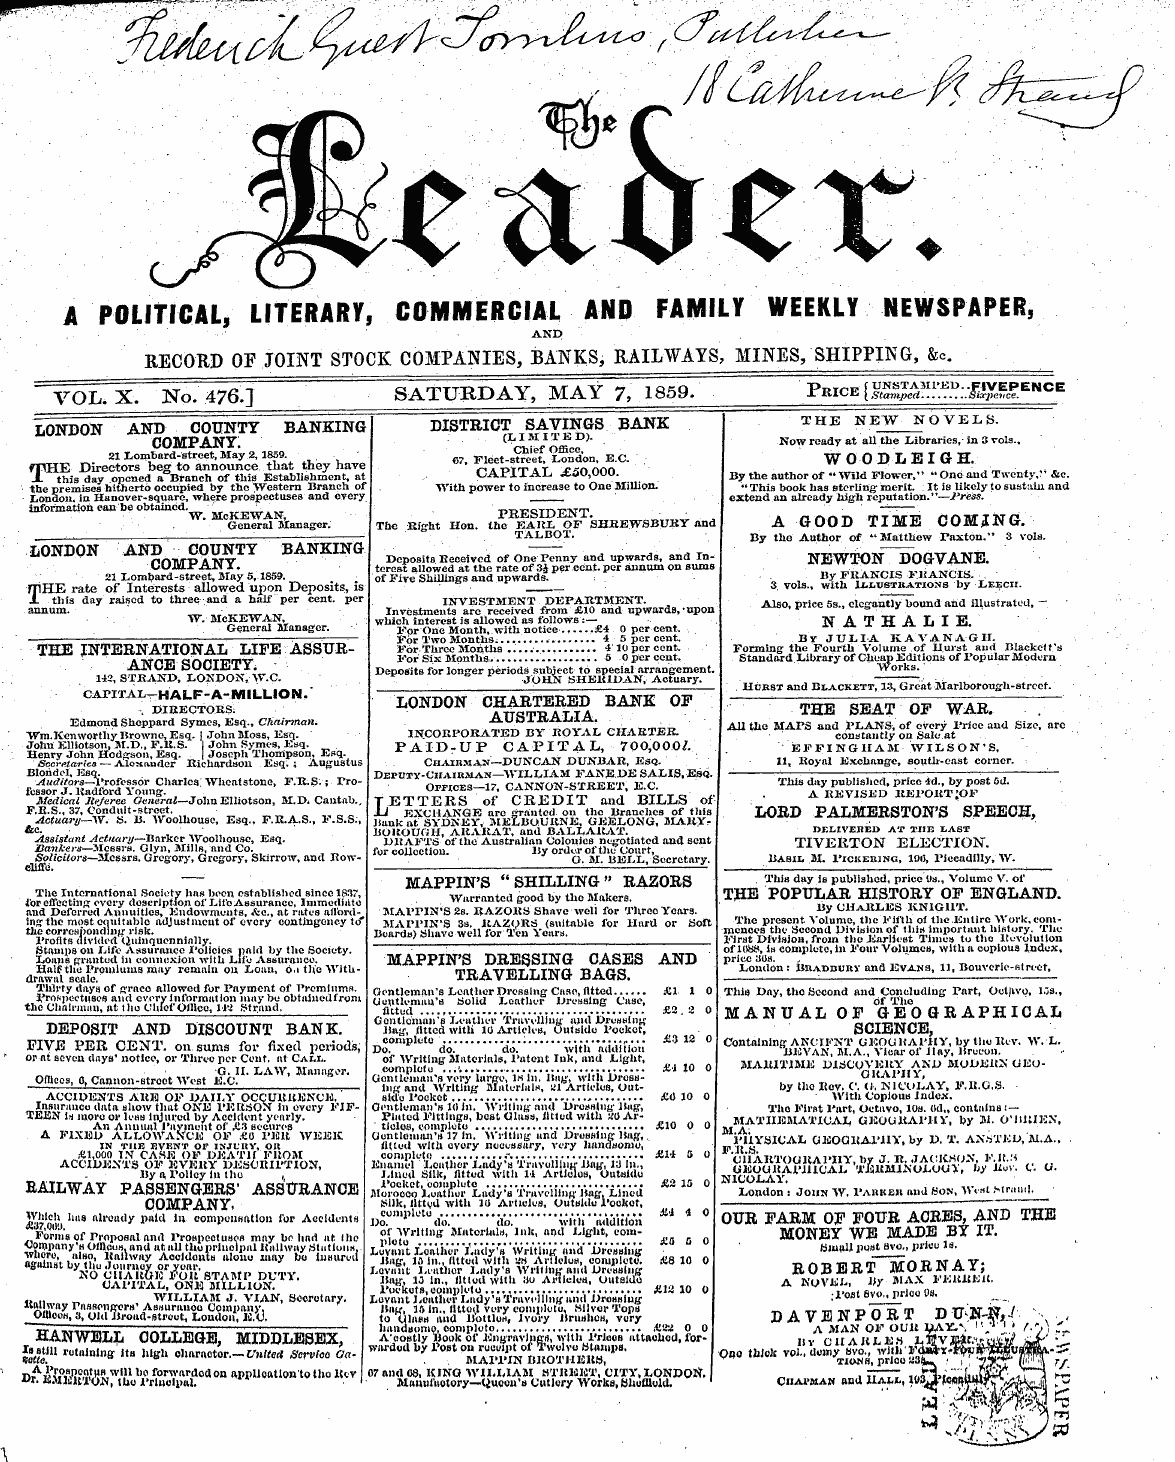 Leader (1850-1860): jS F Y, 2nd edition - London And County Banking Company.